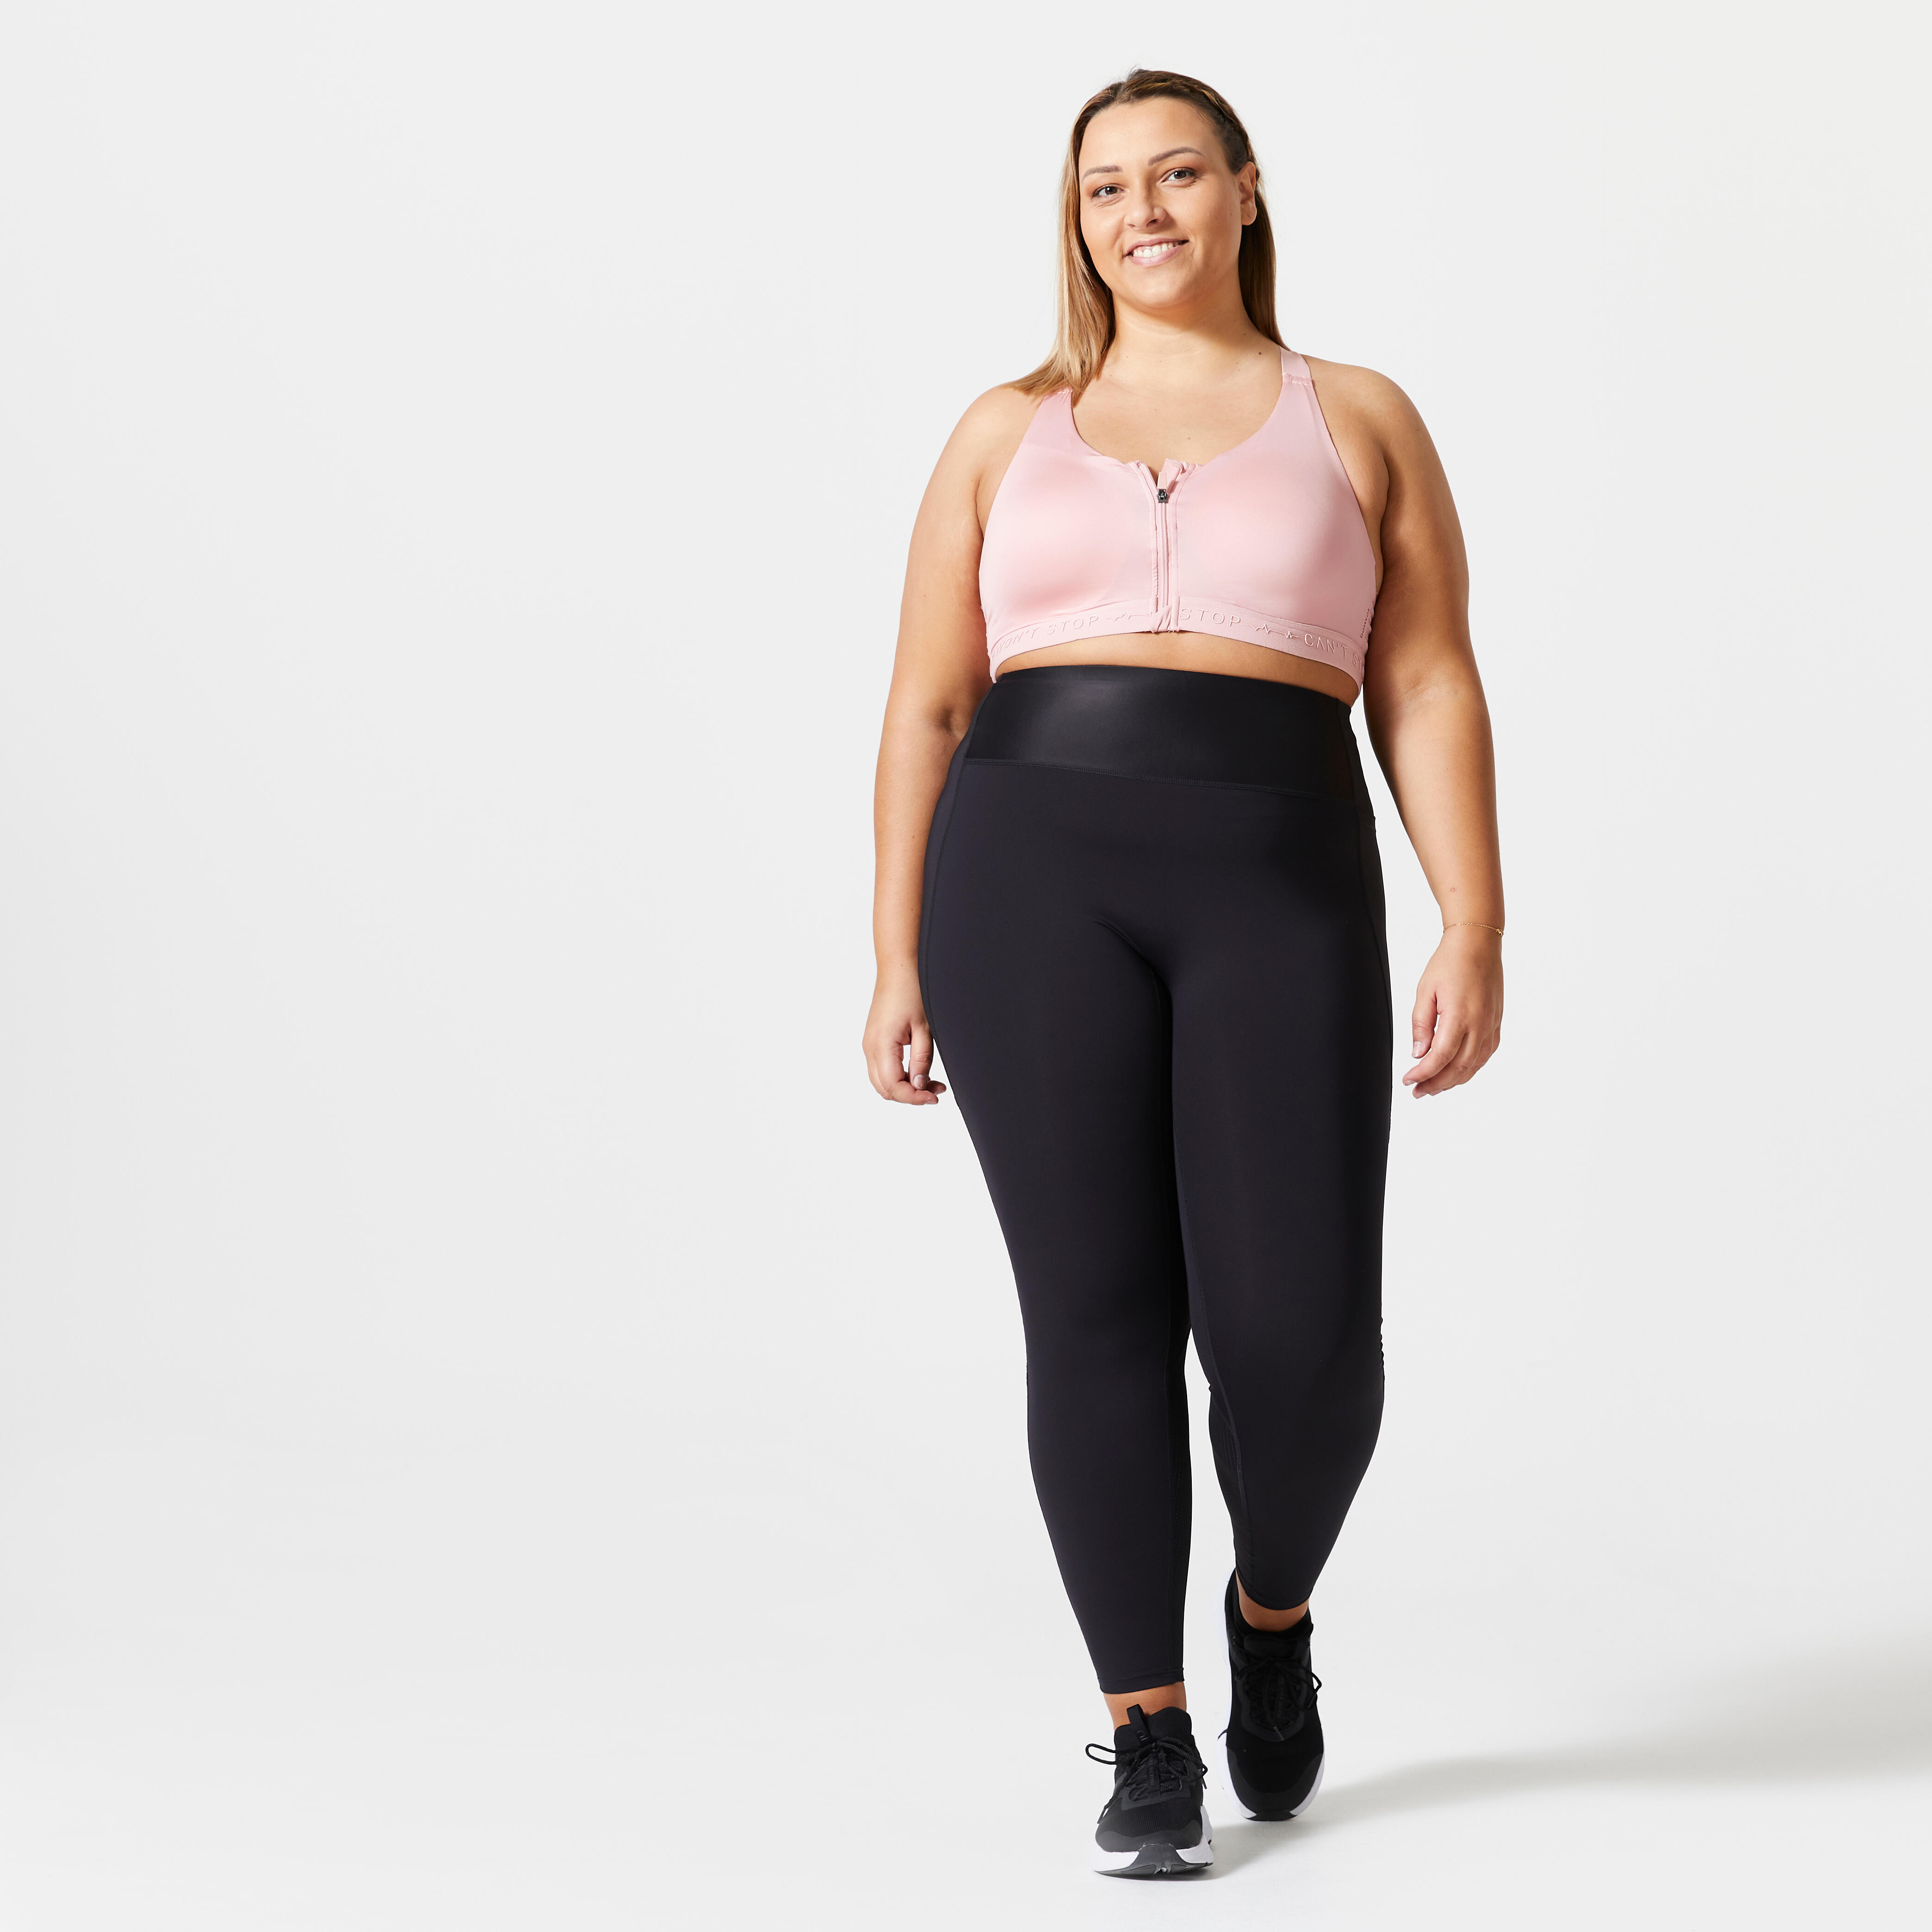 Womens Plus Size Training & Gym Pants & Tights.